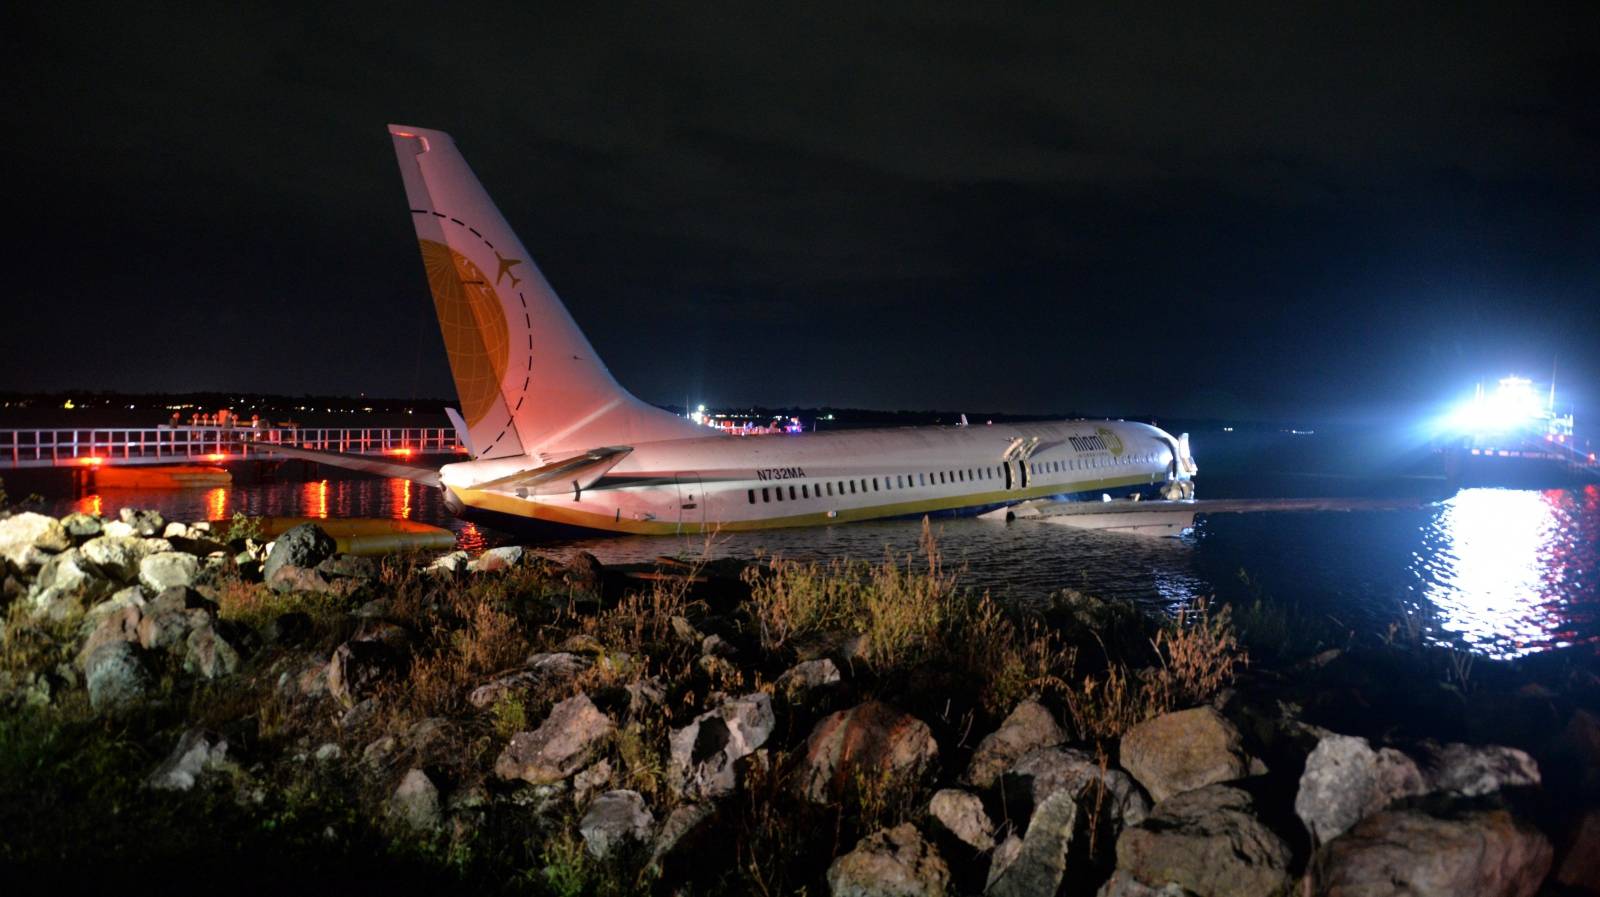 Boeing 737 aircraft sits in shallow water of the St Johns River after it slid off the runway at Naval Air Station, Jacksonville, Florida